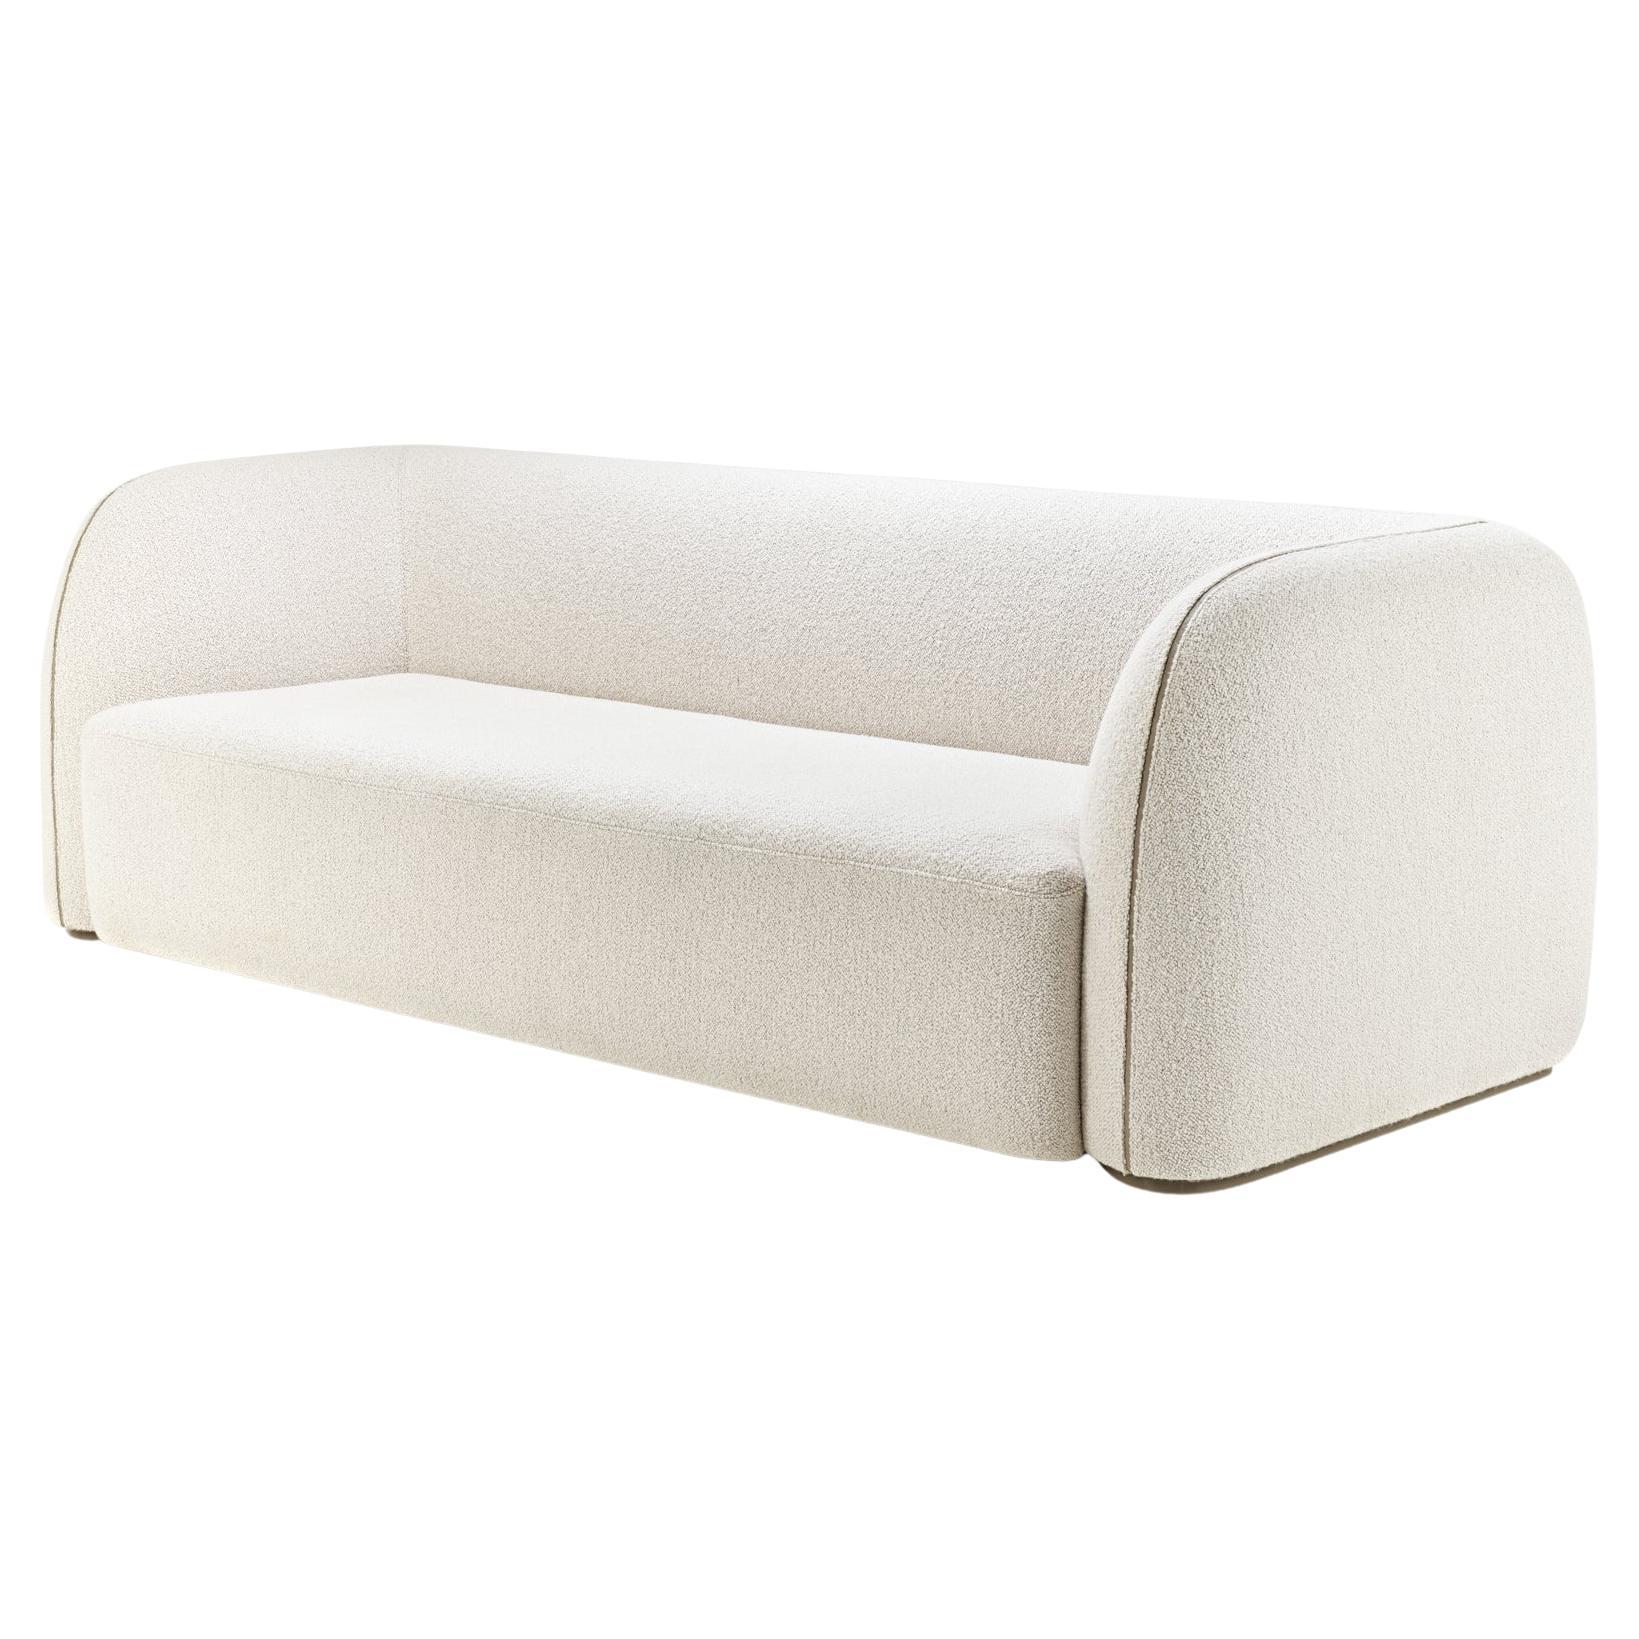 Elephant Sofa, Solid Ash/Beech Plinth, Upholstered in Fabric, Leather Details